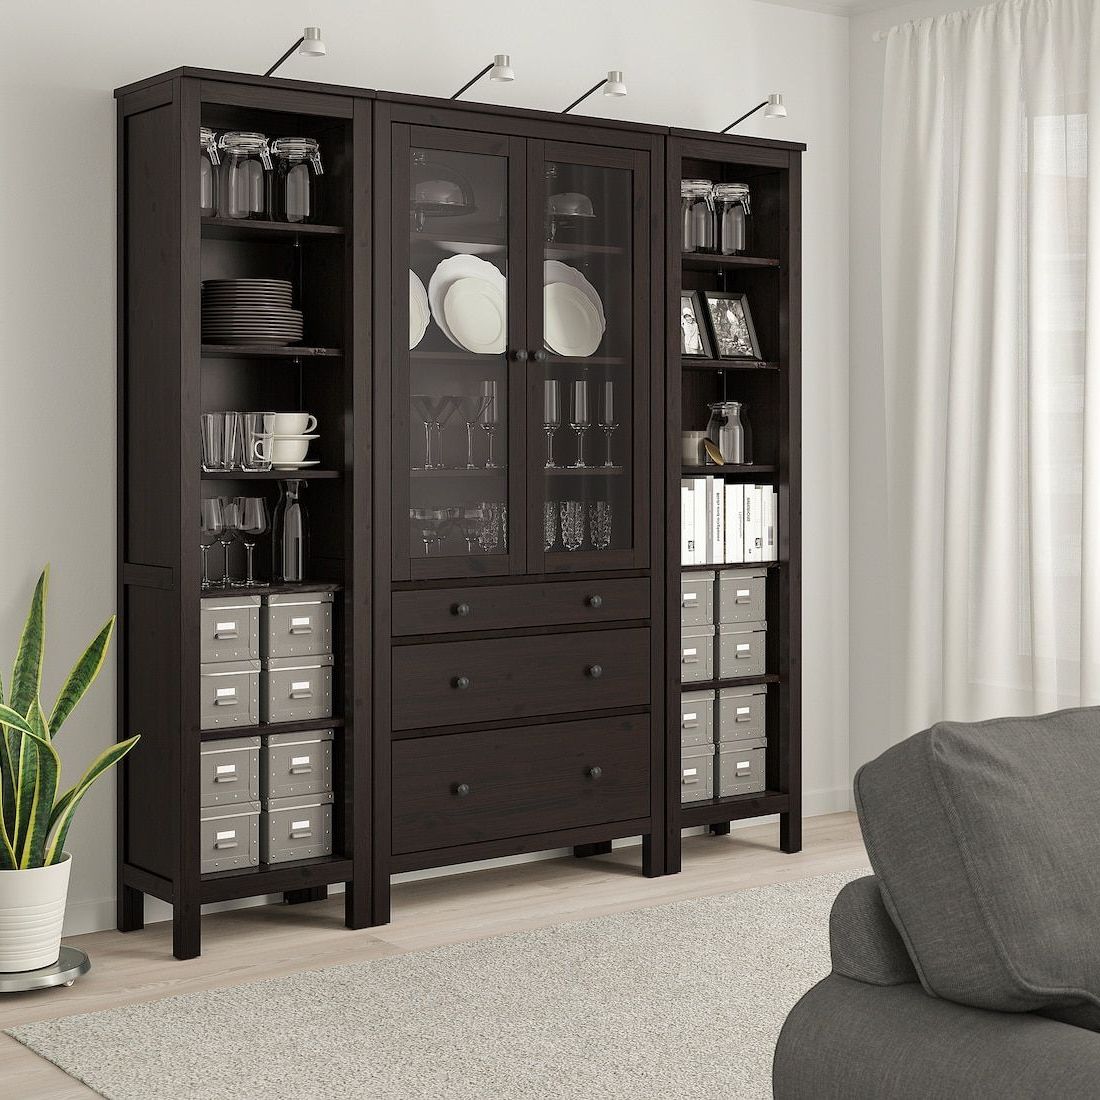 Hemnes Storage Combination W Doors/drawers – Black Brown Pertaining To Dark Brown Tv Cabinets With 2 Sliding Doors And Drawer (View 10 of 20)